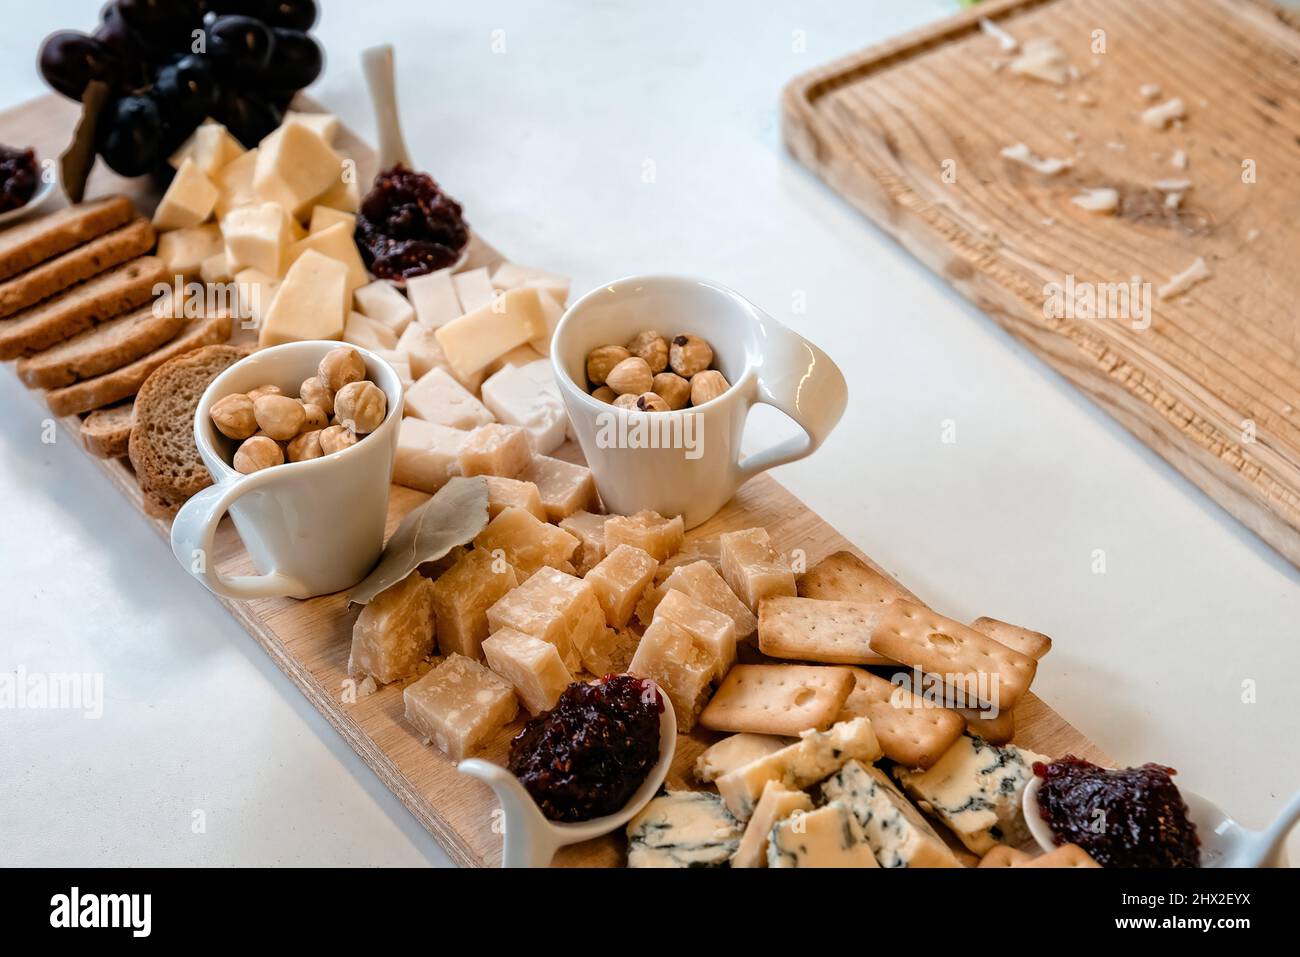 Cheeses selection with raspberry jeam and walnuts on rustic wooden table. Stock Photo